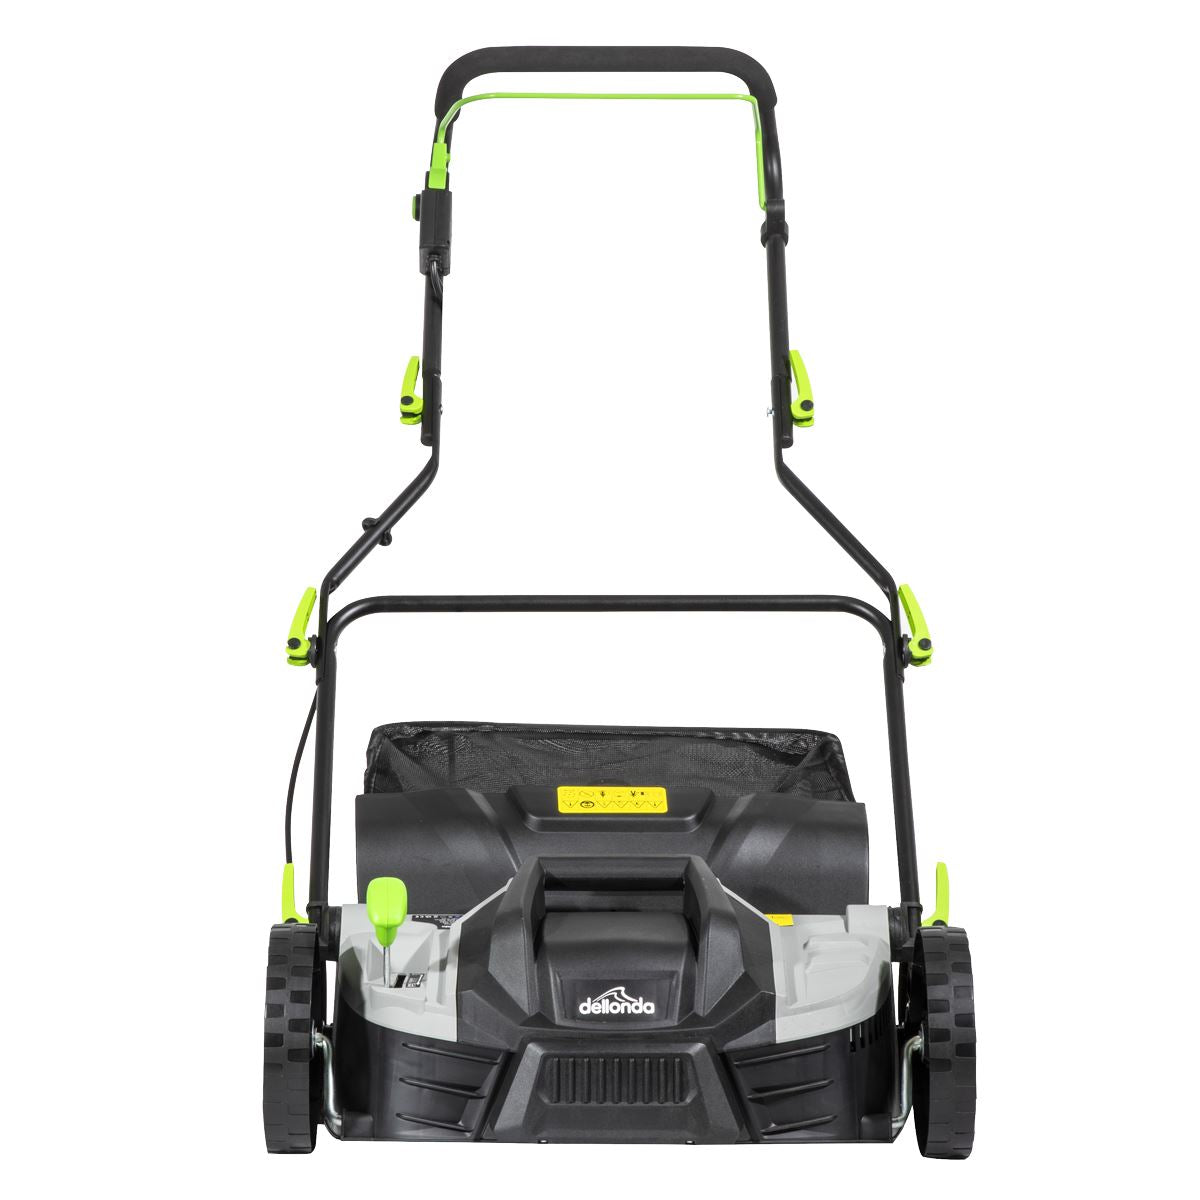 Dellonda 1500W Electric 2-in-1 Scarifier with 5-Heights, 36cm Cutting Diameter, 45L Grass Collection Bag, 10m Mains Cable, Hand Push